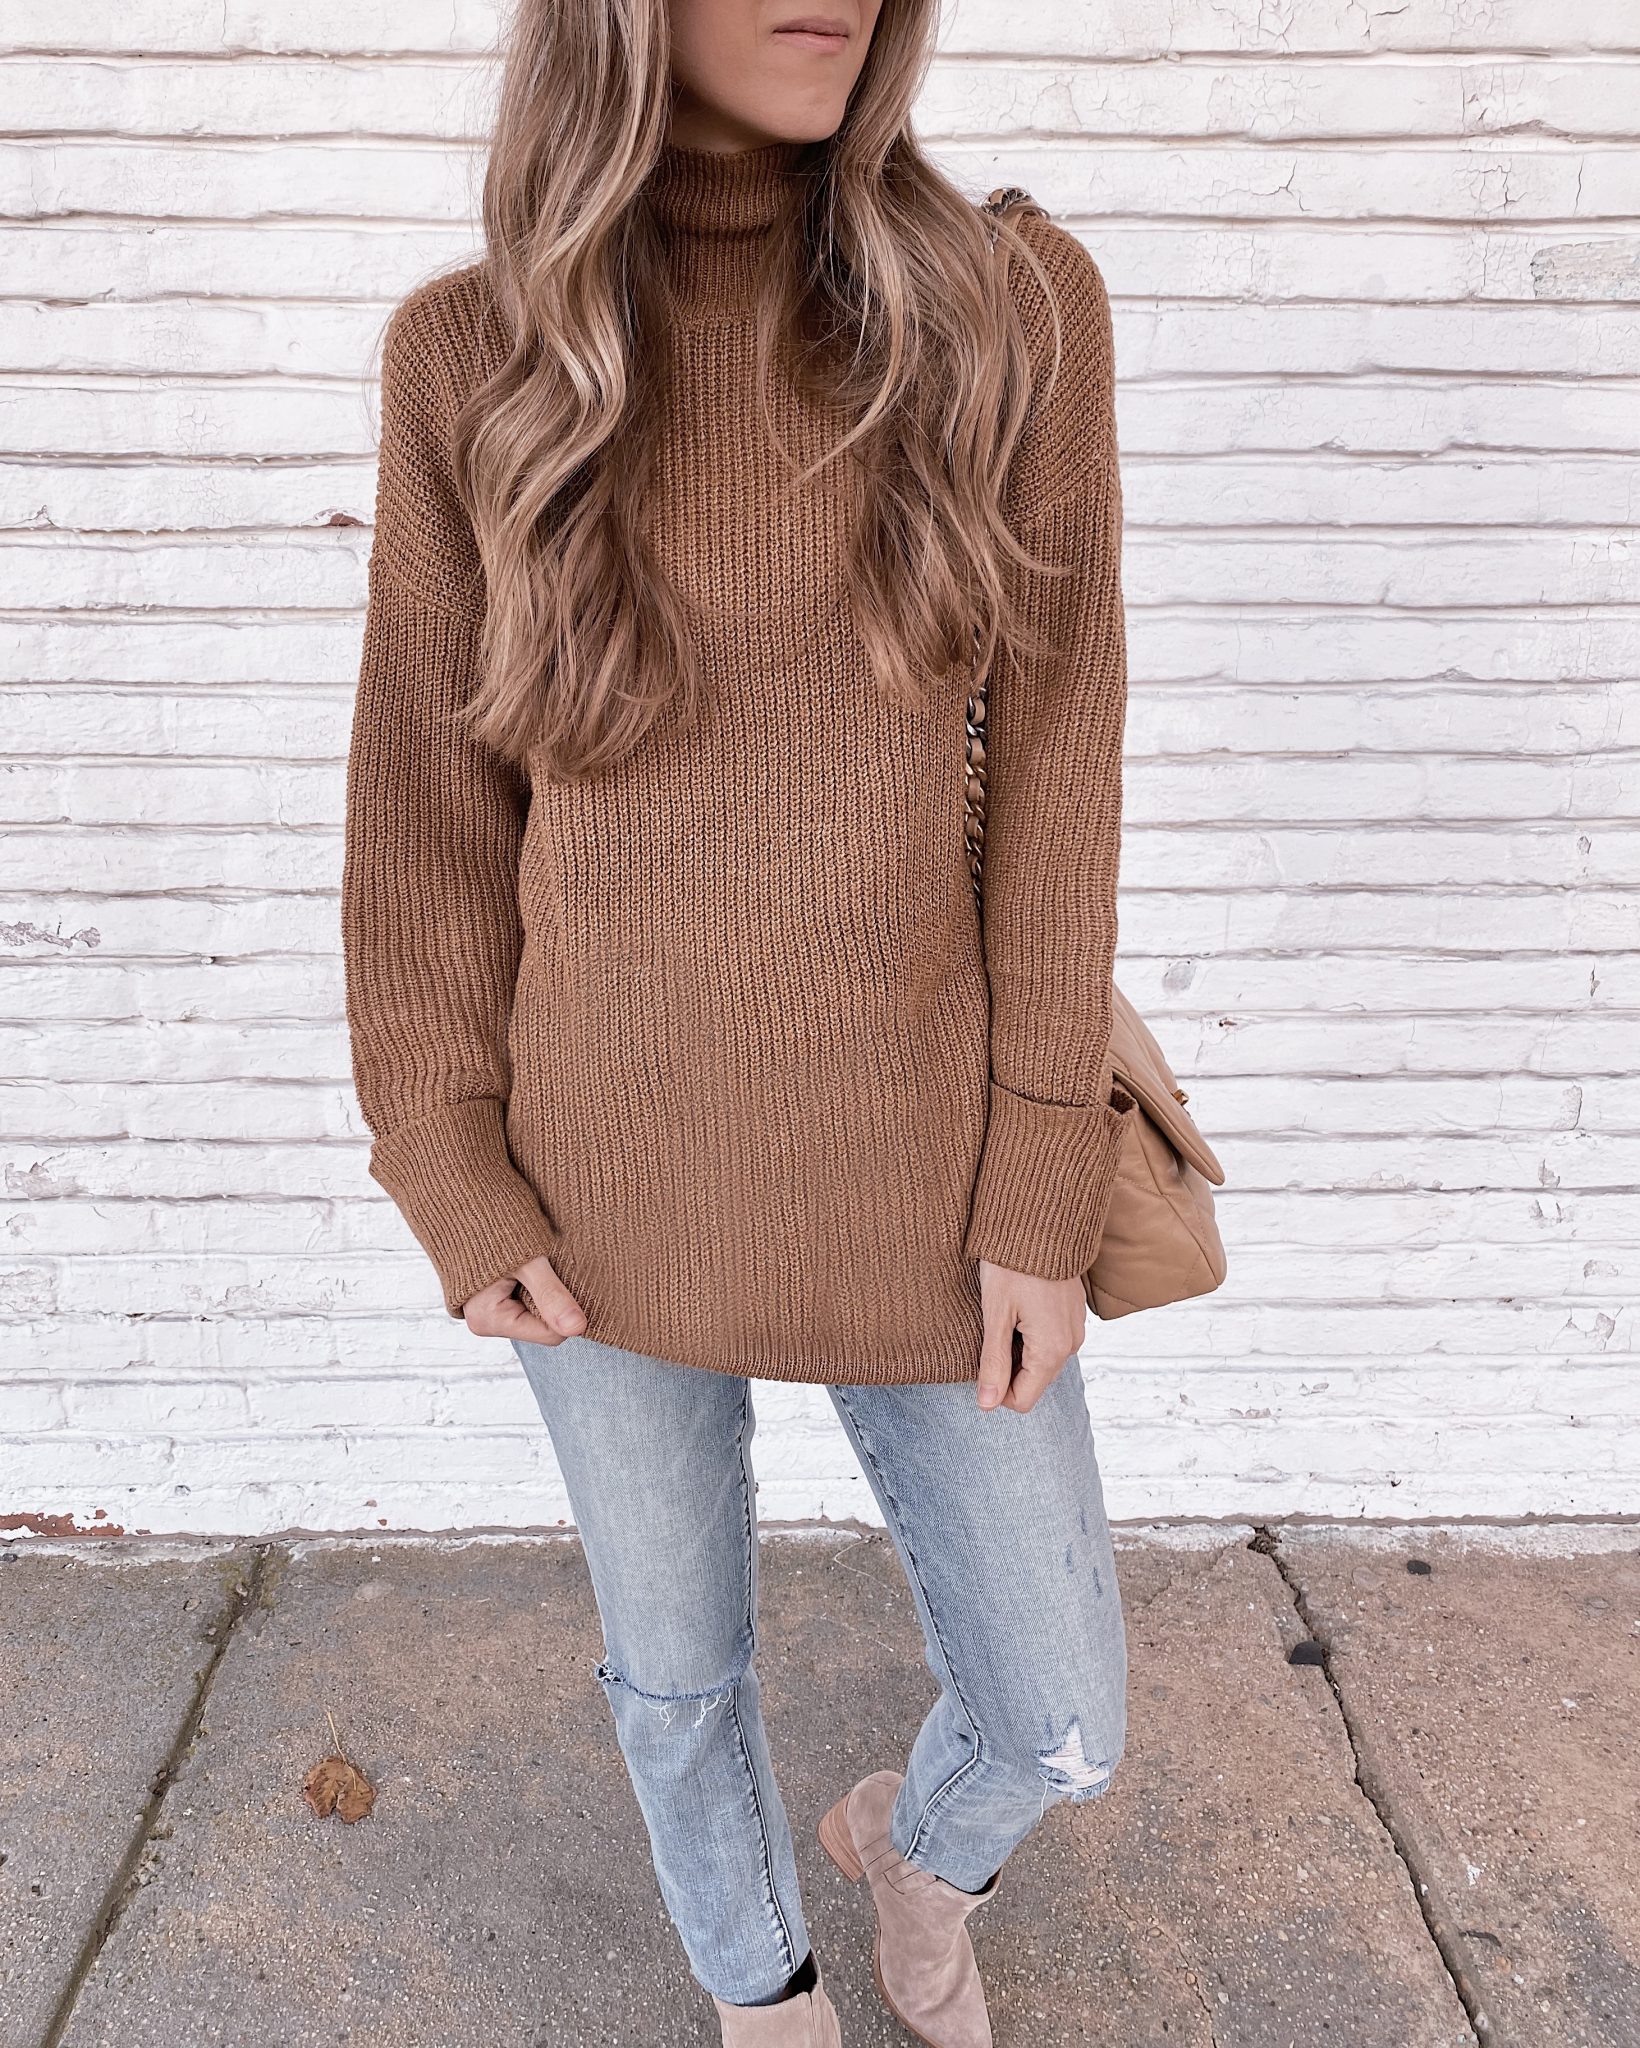 Three Thanksgiving Outfits & How to Wear Them - Sunsets and Stilettos